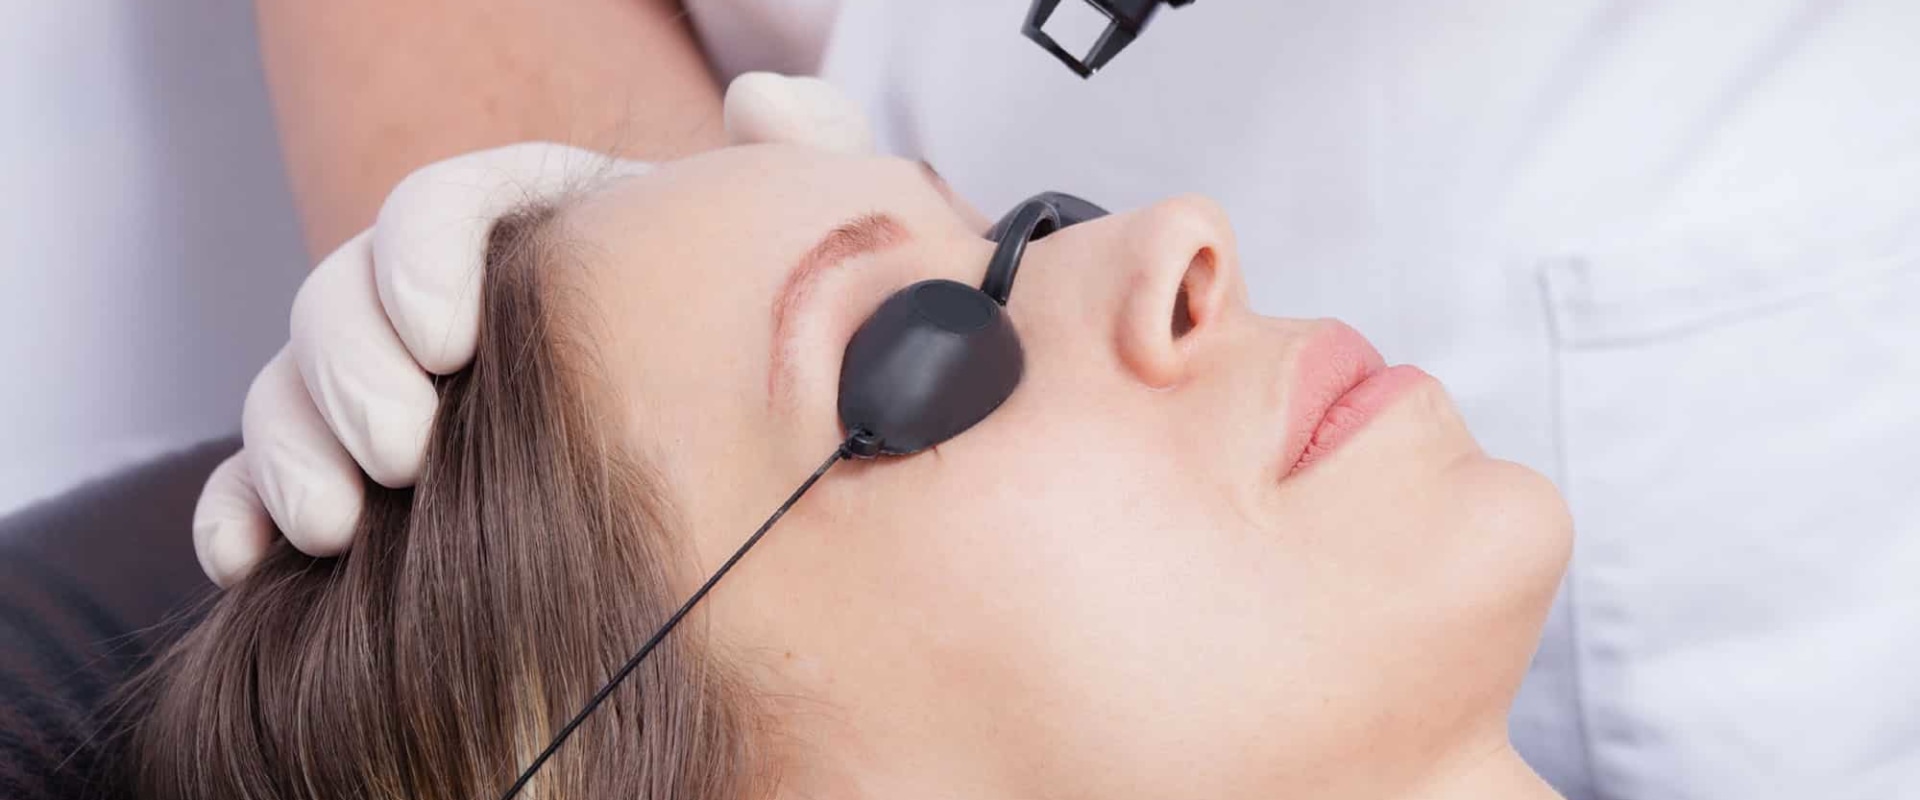 How Much Does Laser Hair Removal Cost for an Eyebrow Wax?